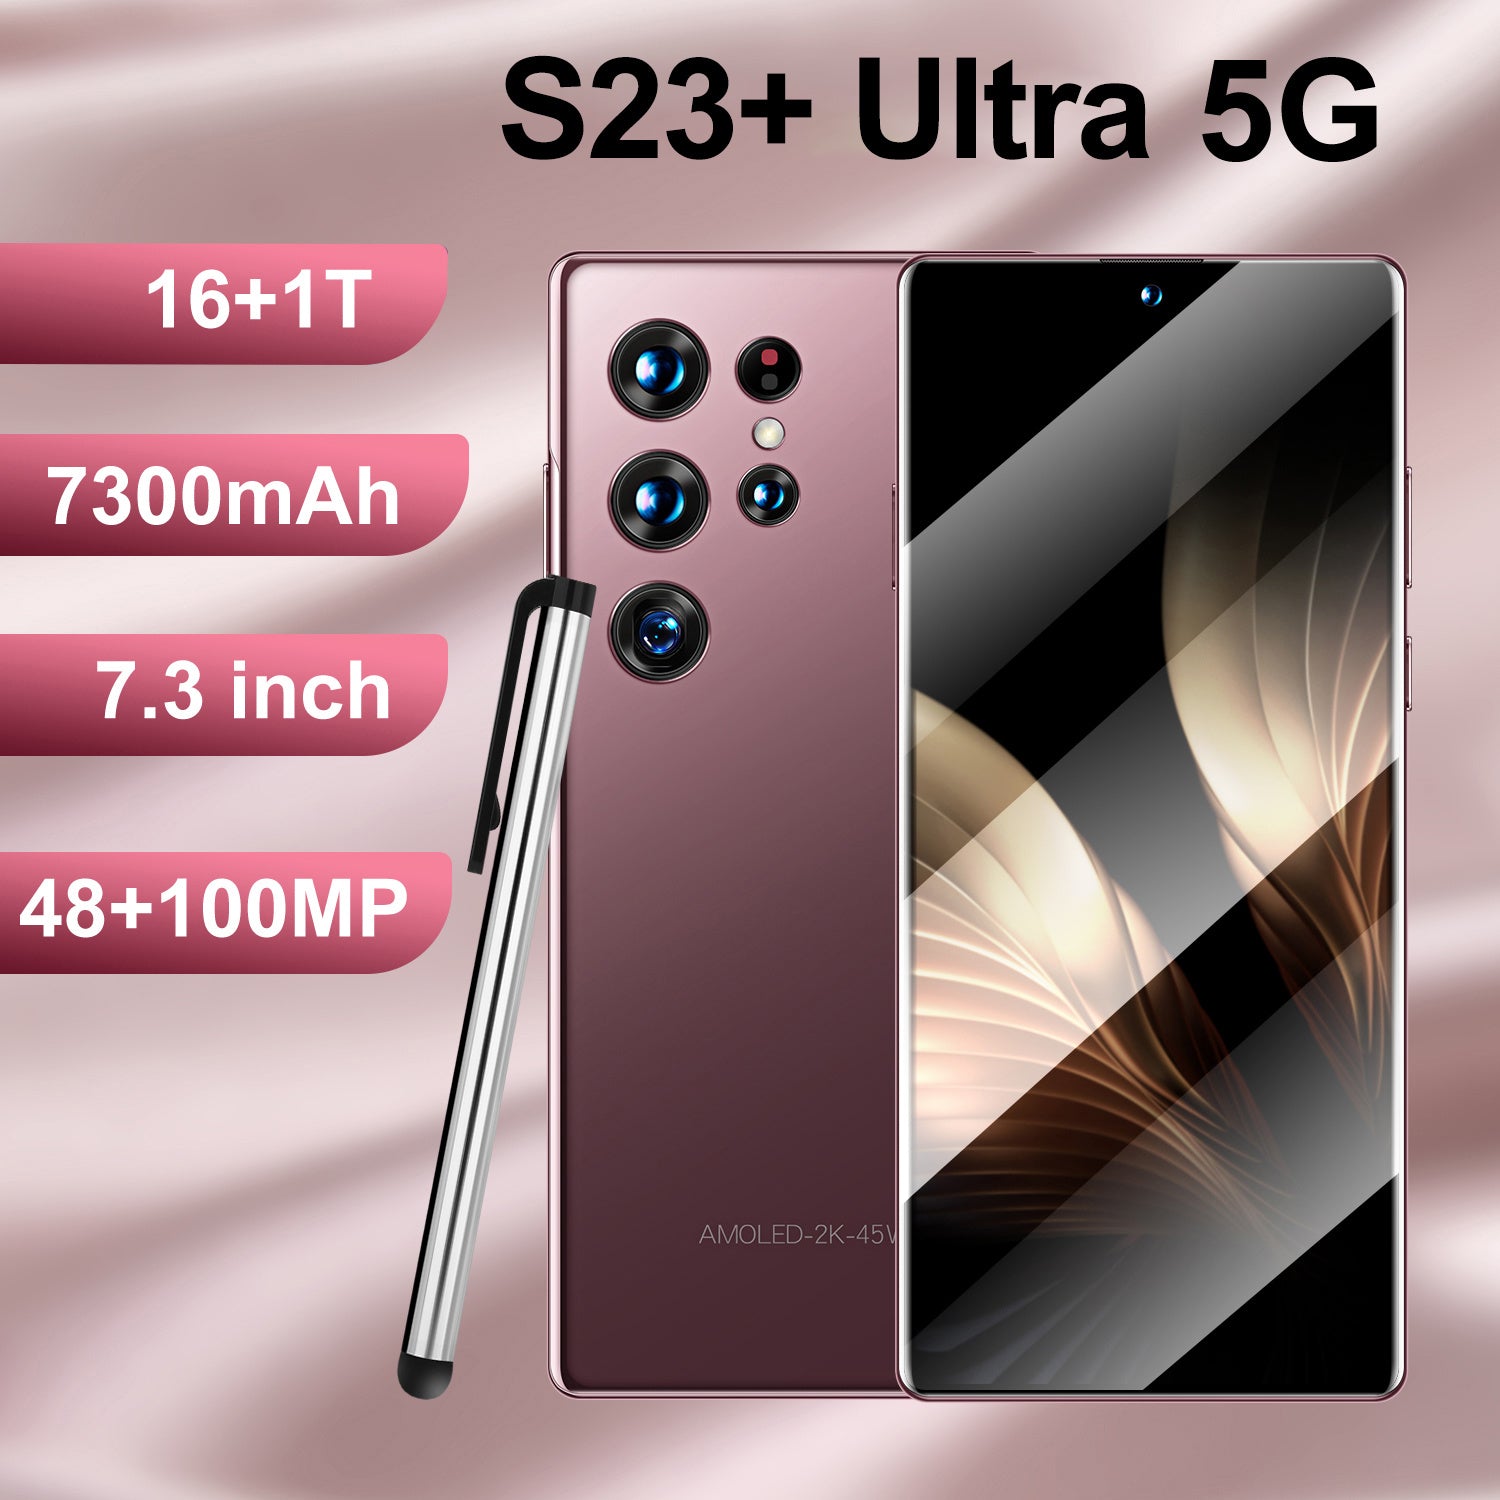 New Smart Cell Phone S23+ Ultra Dual Nano SIM Android Version Ready In Stock